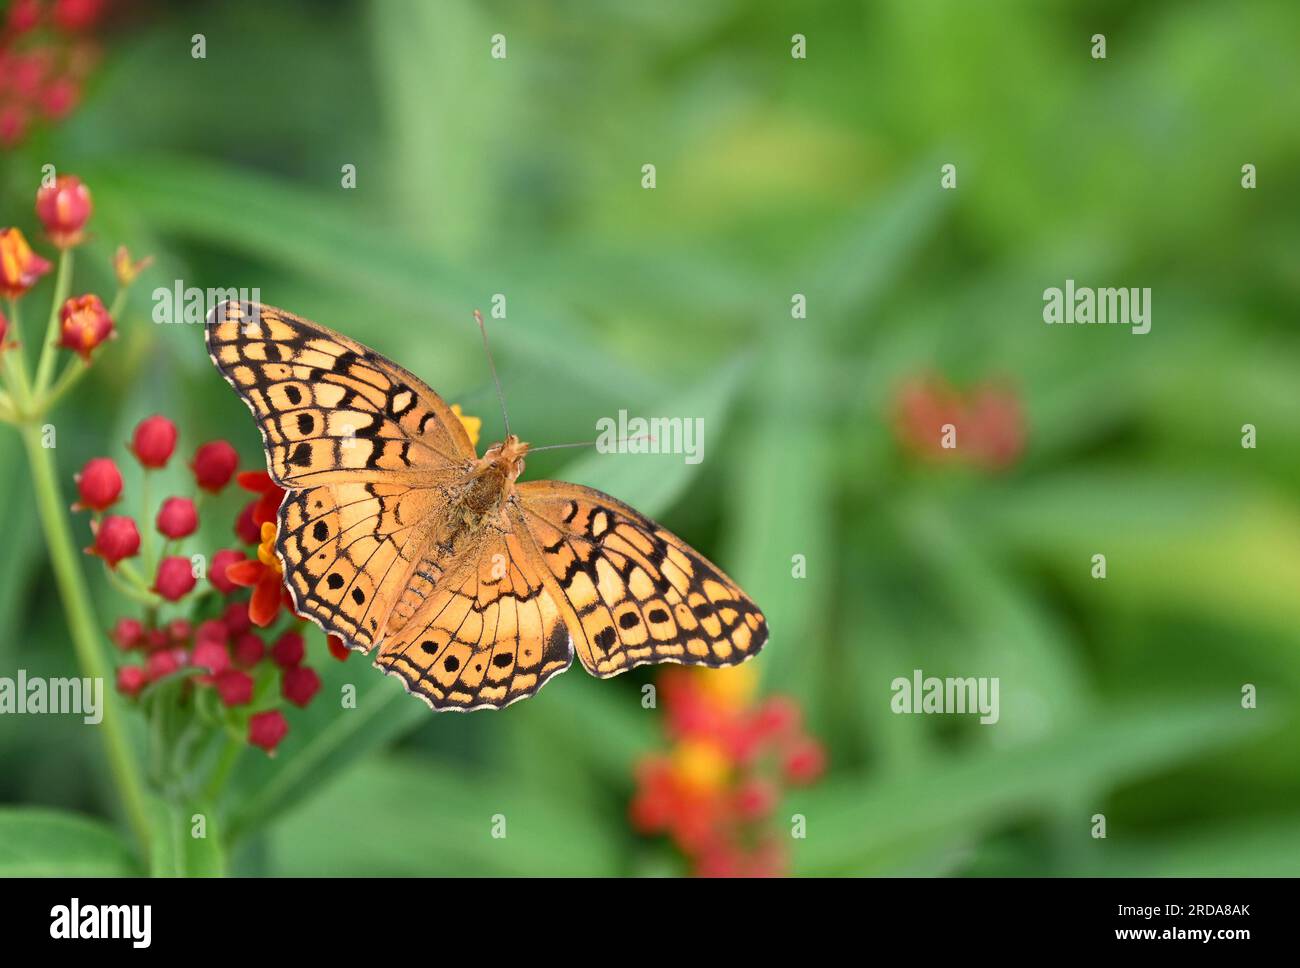 Variegated Fritillary butterfly (Euptoieta claudia) wide opened wings on Milkweed flowers in the summer garden. Natural green background with copy spa Stock Photo